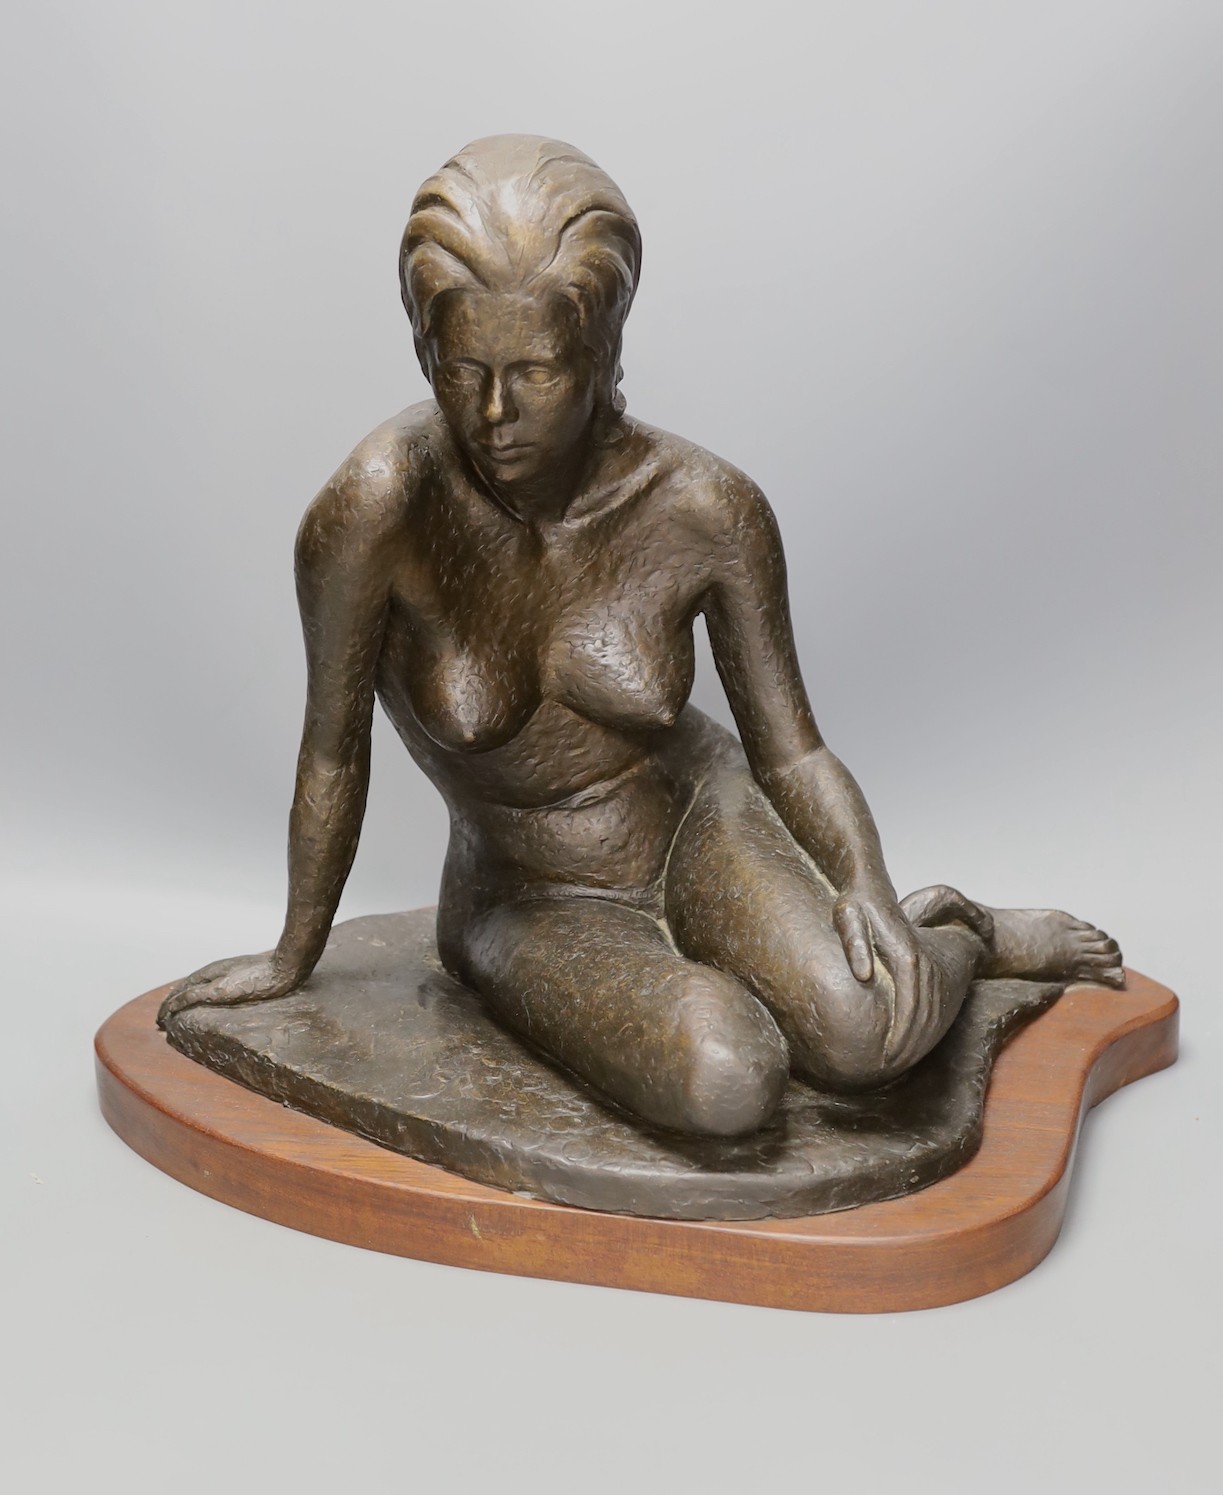 Audrey Shaw. A bronzed resin figure of a seated girl - 43cm tall